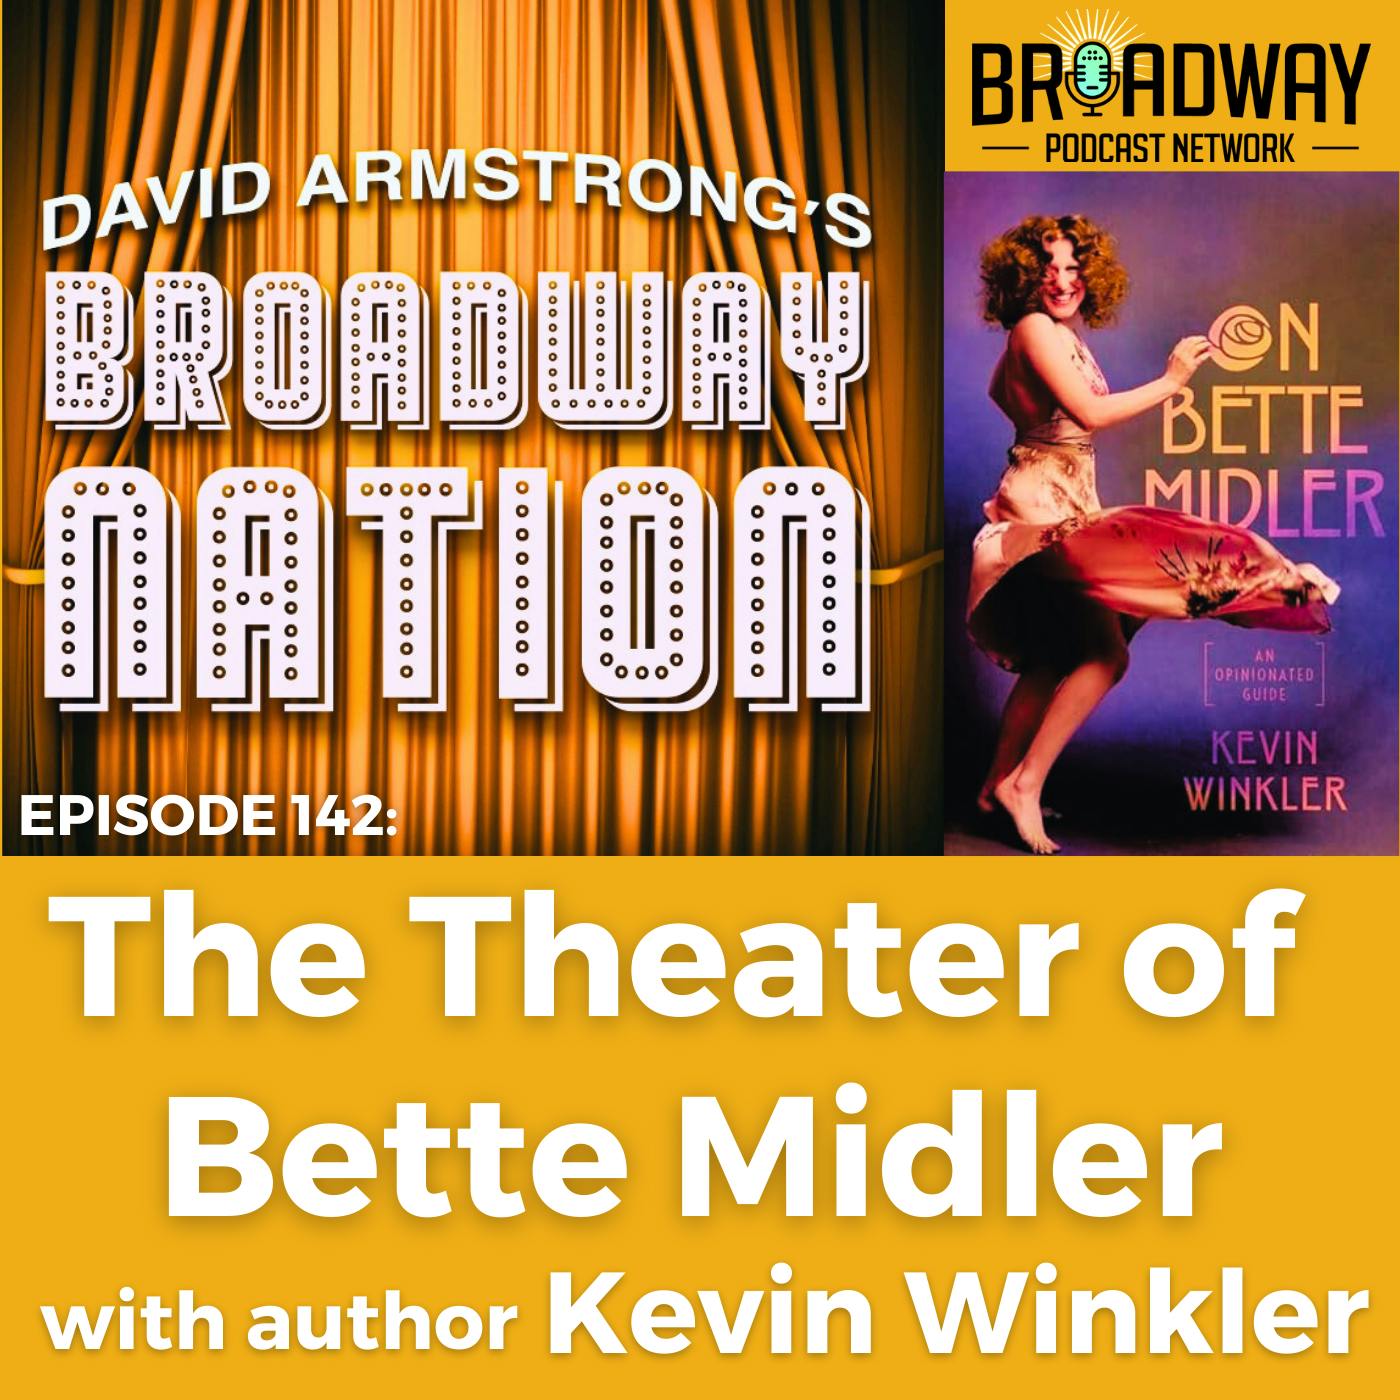 Episode 142: The Theater of Bette Midler